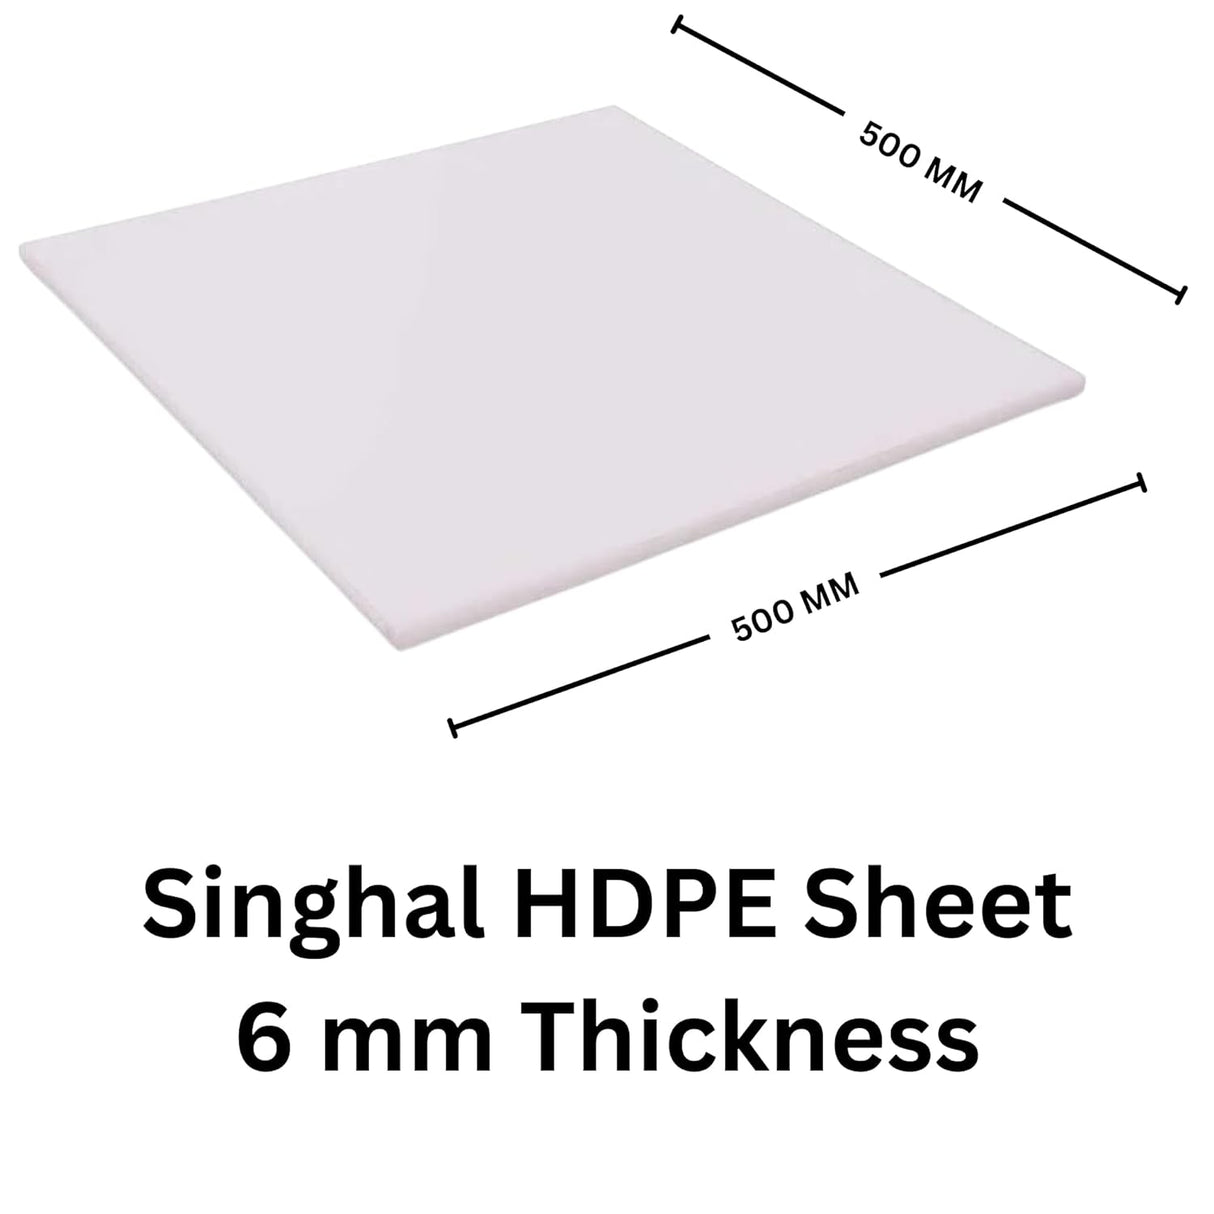 Singhal HDPE Sheet 50 x 50 CM Size High-Density Polyethylene Food Grade Lightweight High Tensile Strength Suitable For Chemical Tanks, DIY, and more. Milky White, 500 x 500 mm, 6 MM Thickness - 1 Pcs